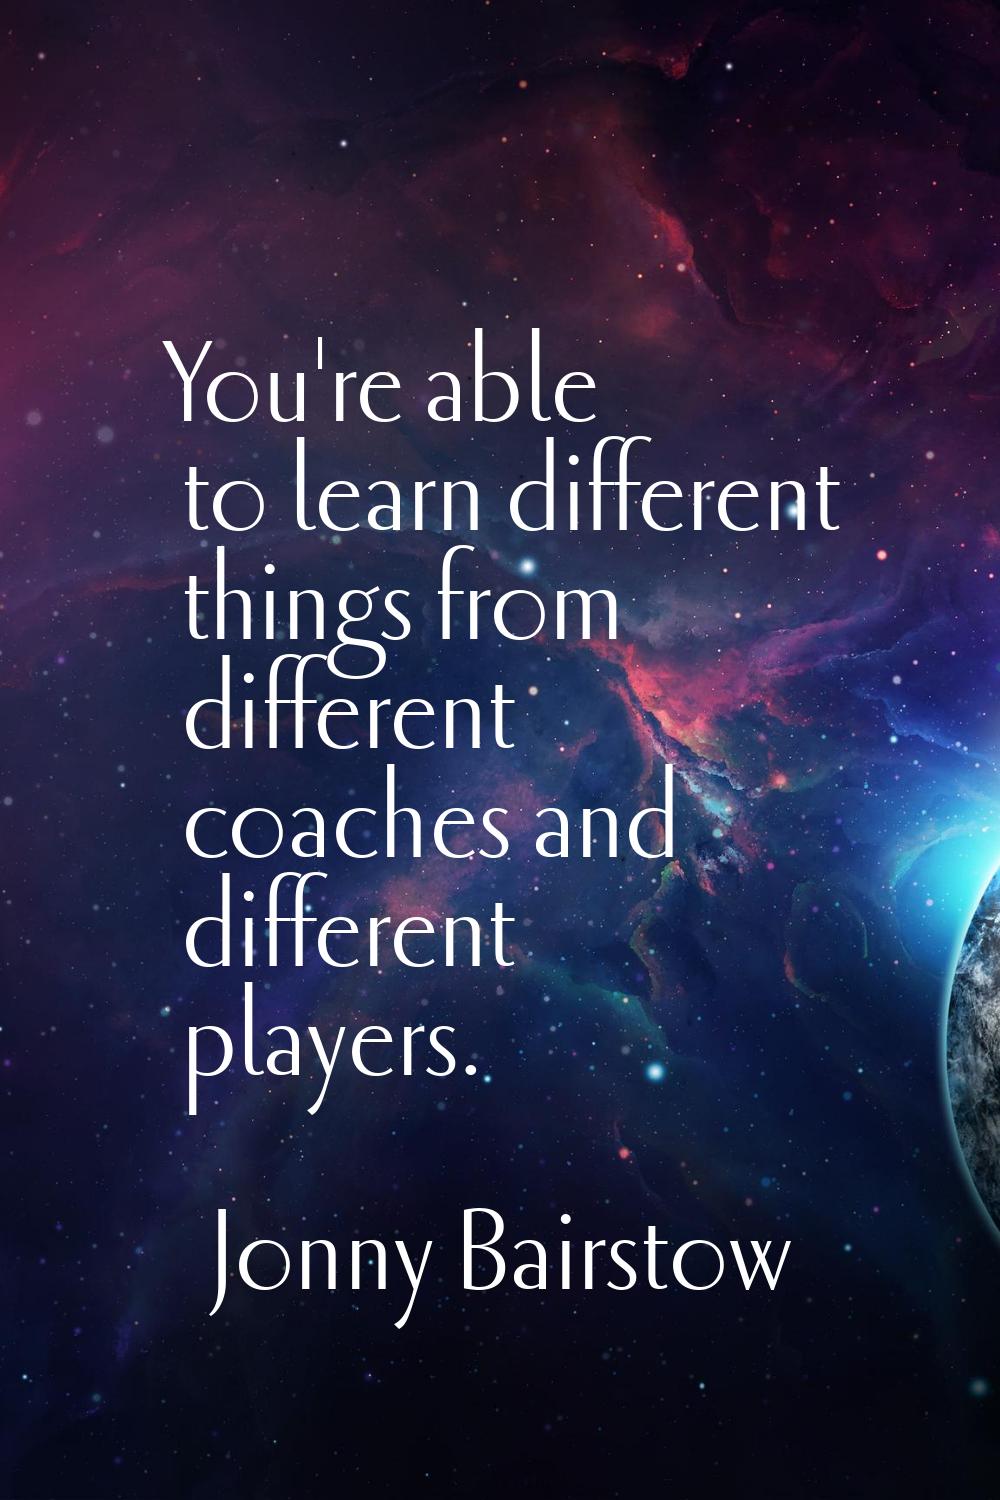 You're able to learn different things from different coaches and different players.